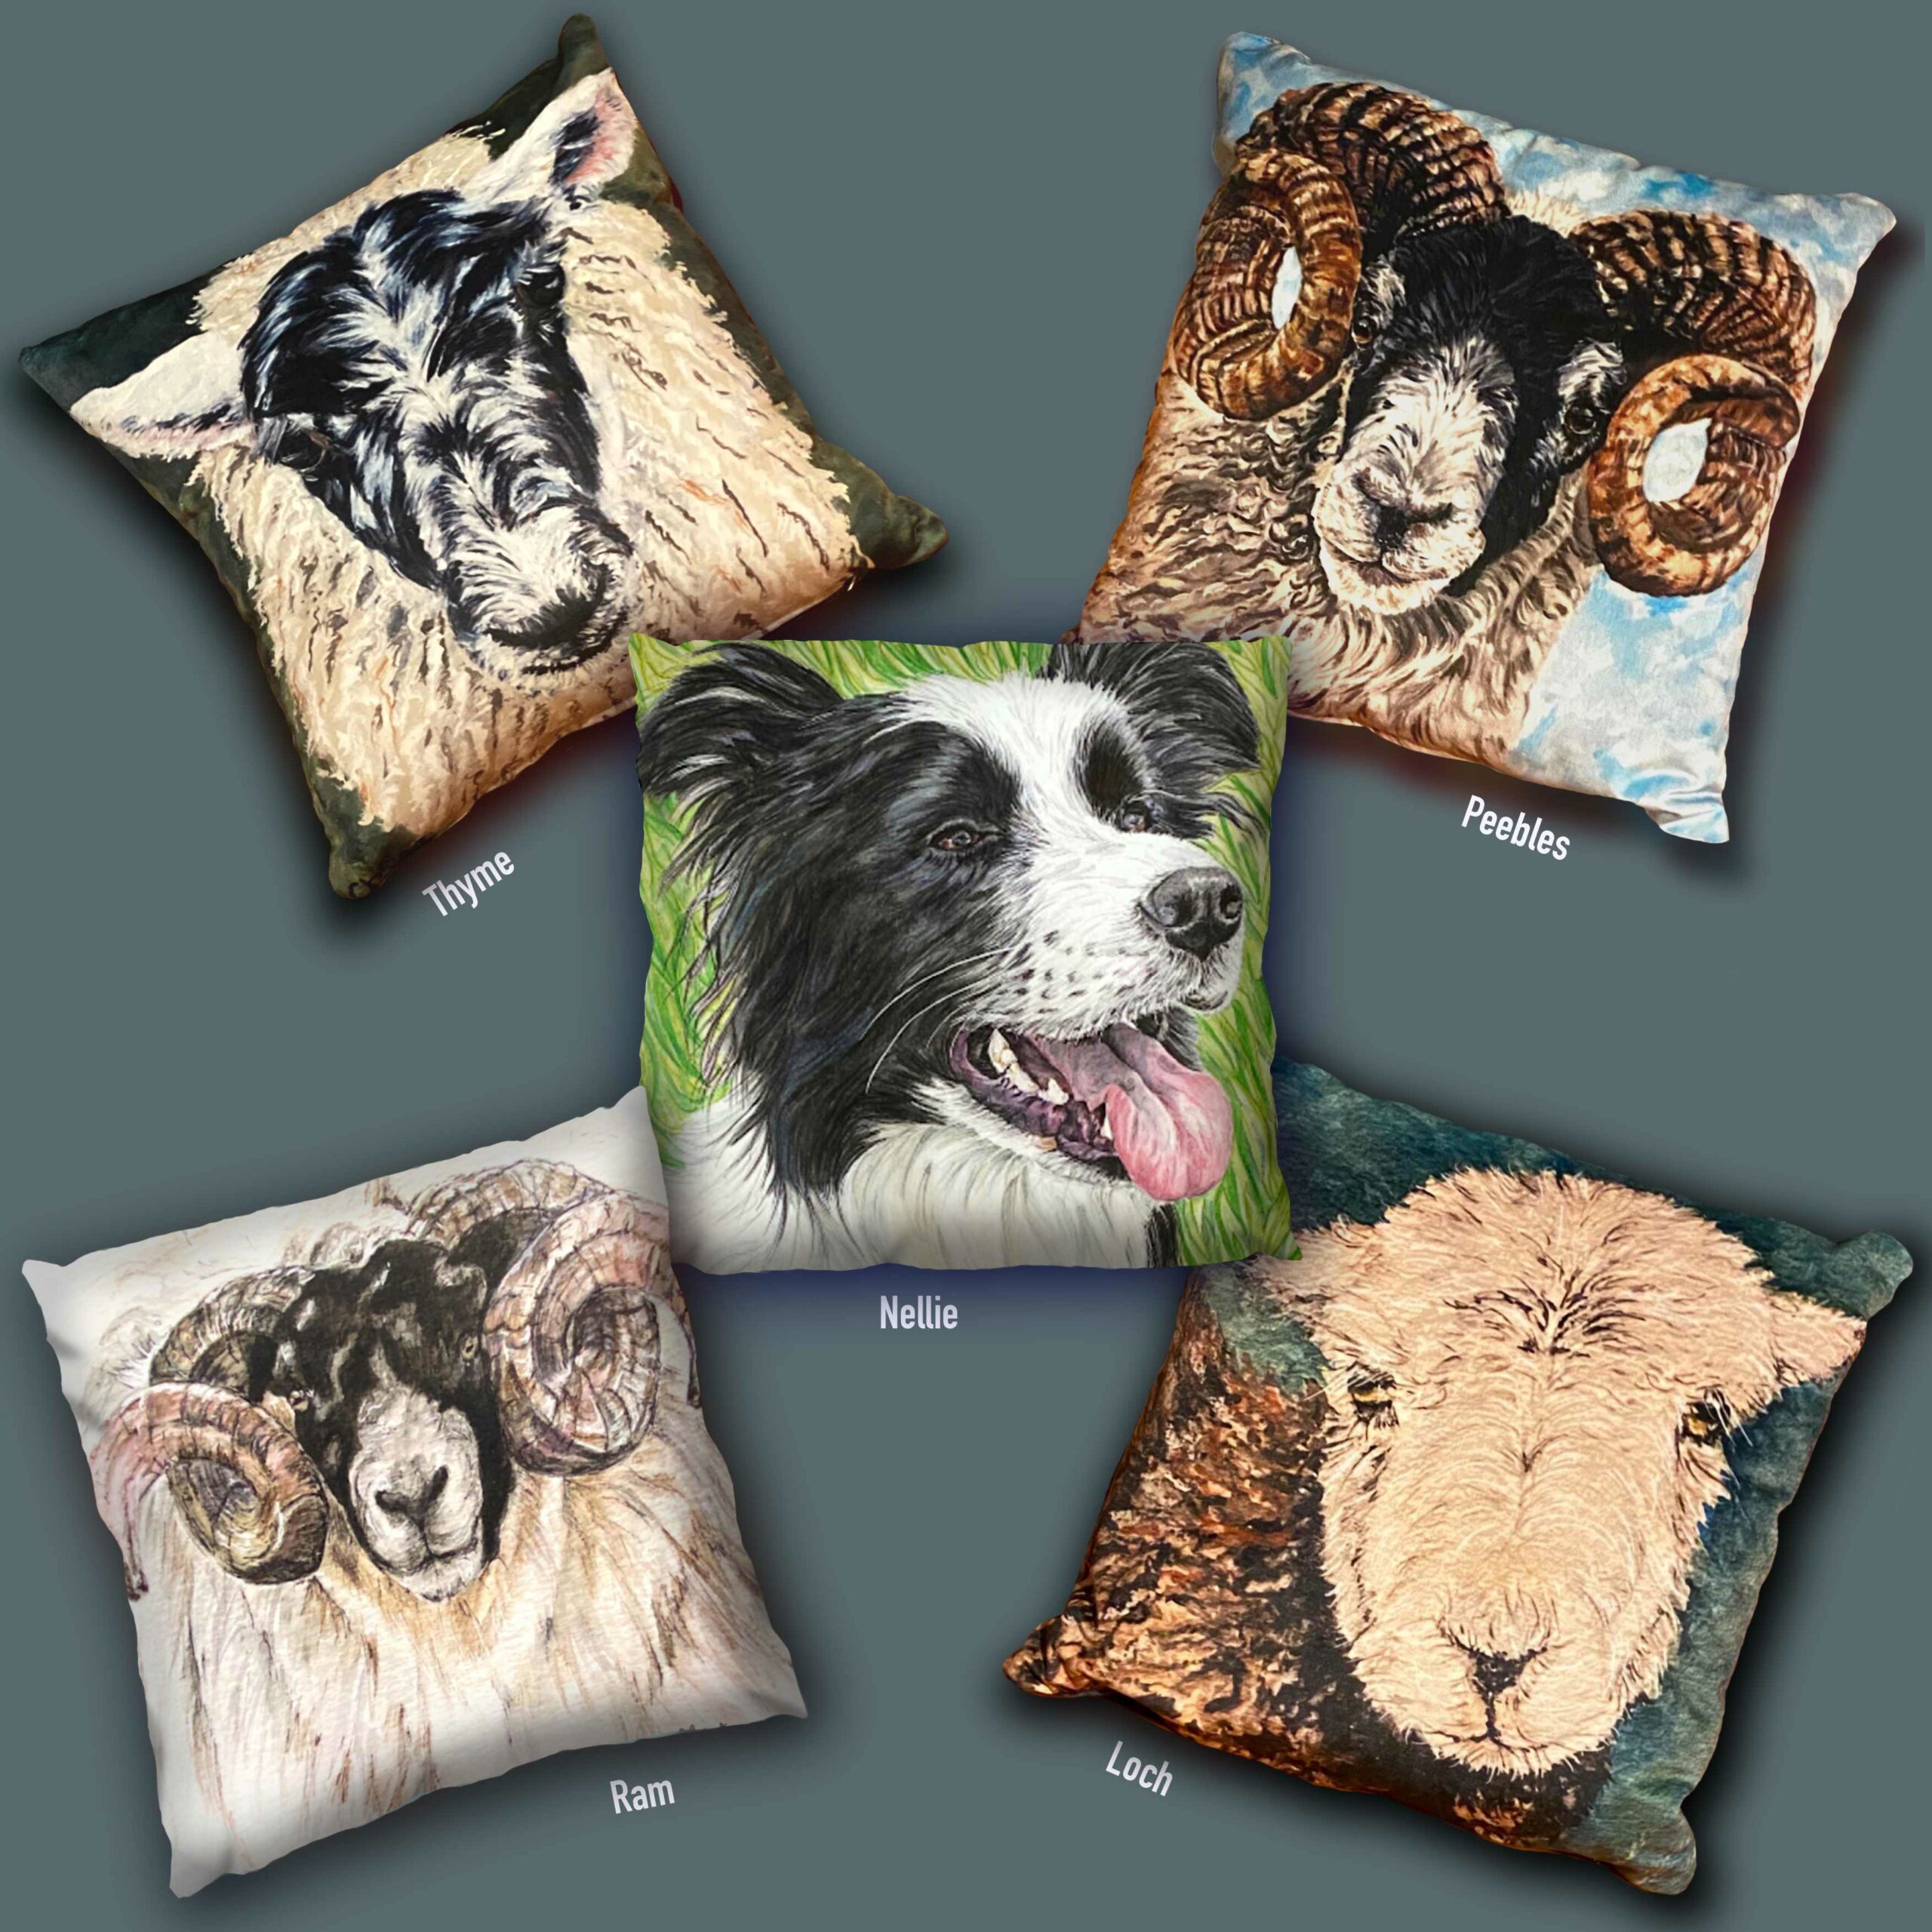 One picture with all 5 sheep cushions . Peebles, ram, loch, thyme and sheepdog